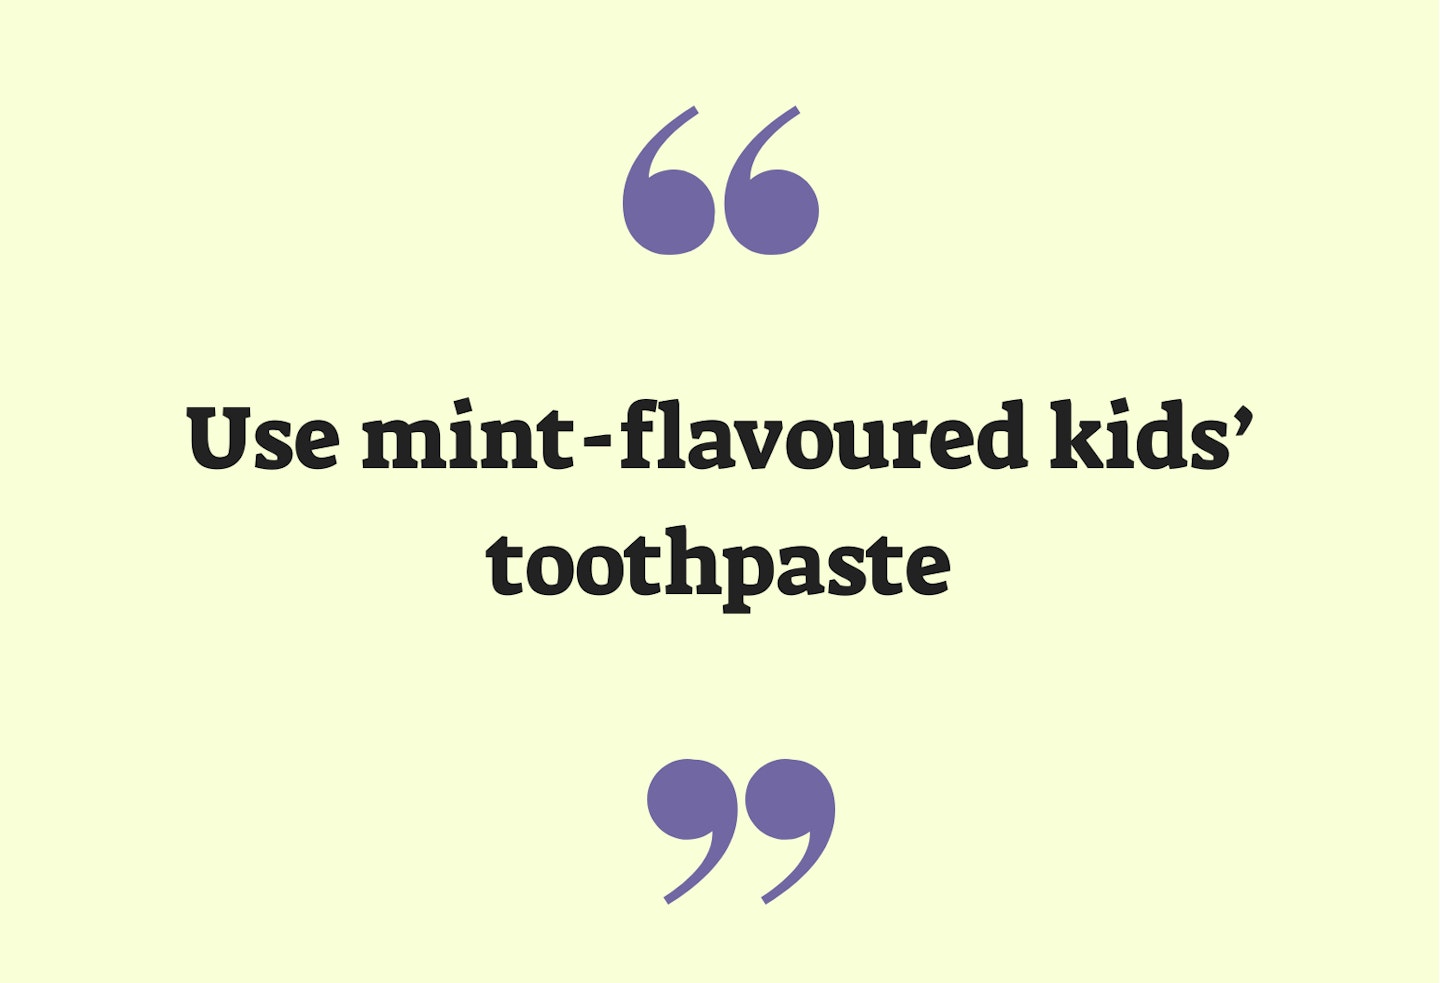 9 dentists give their top tips for looking after their toddler’s teeth